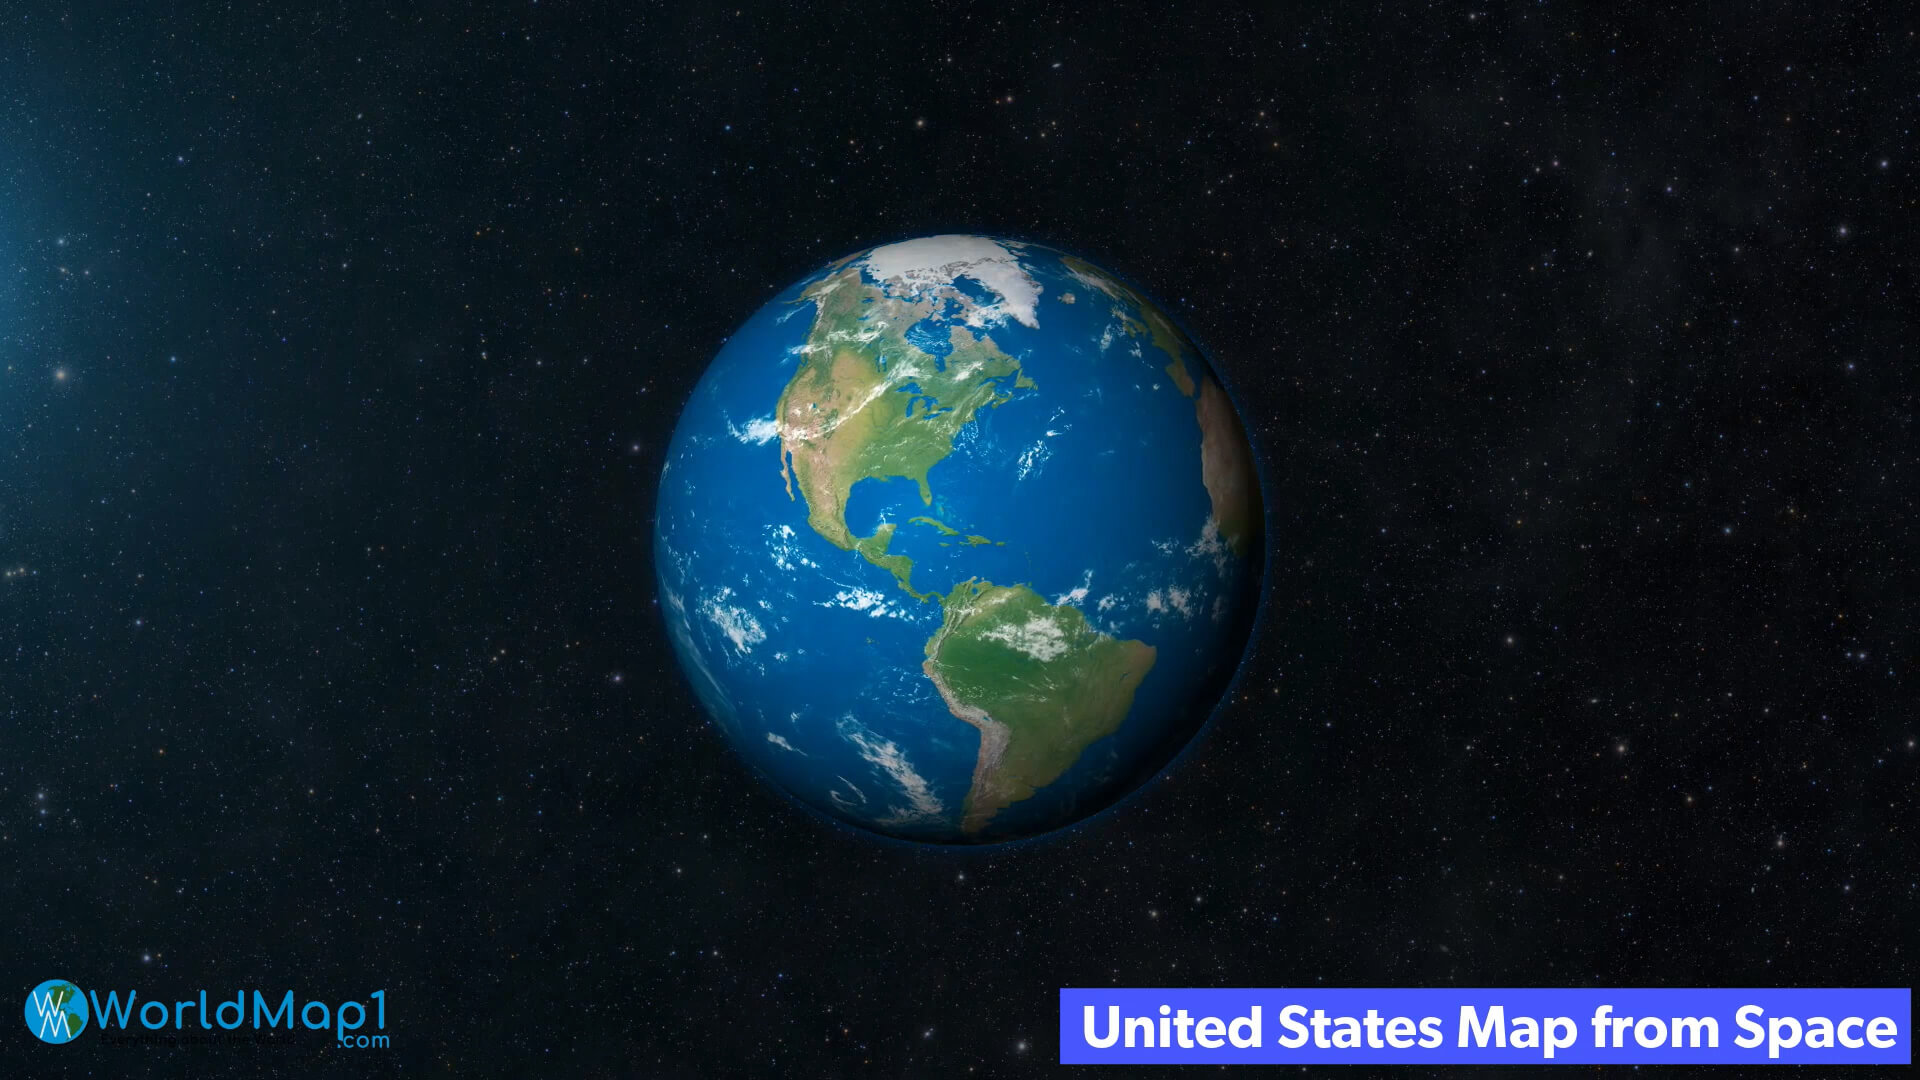 United States Map from Space